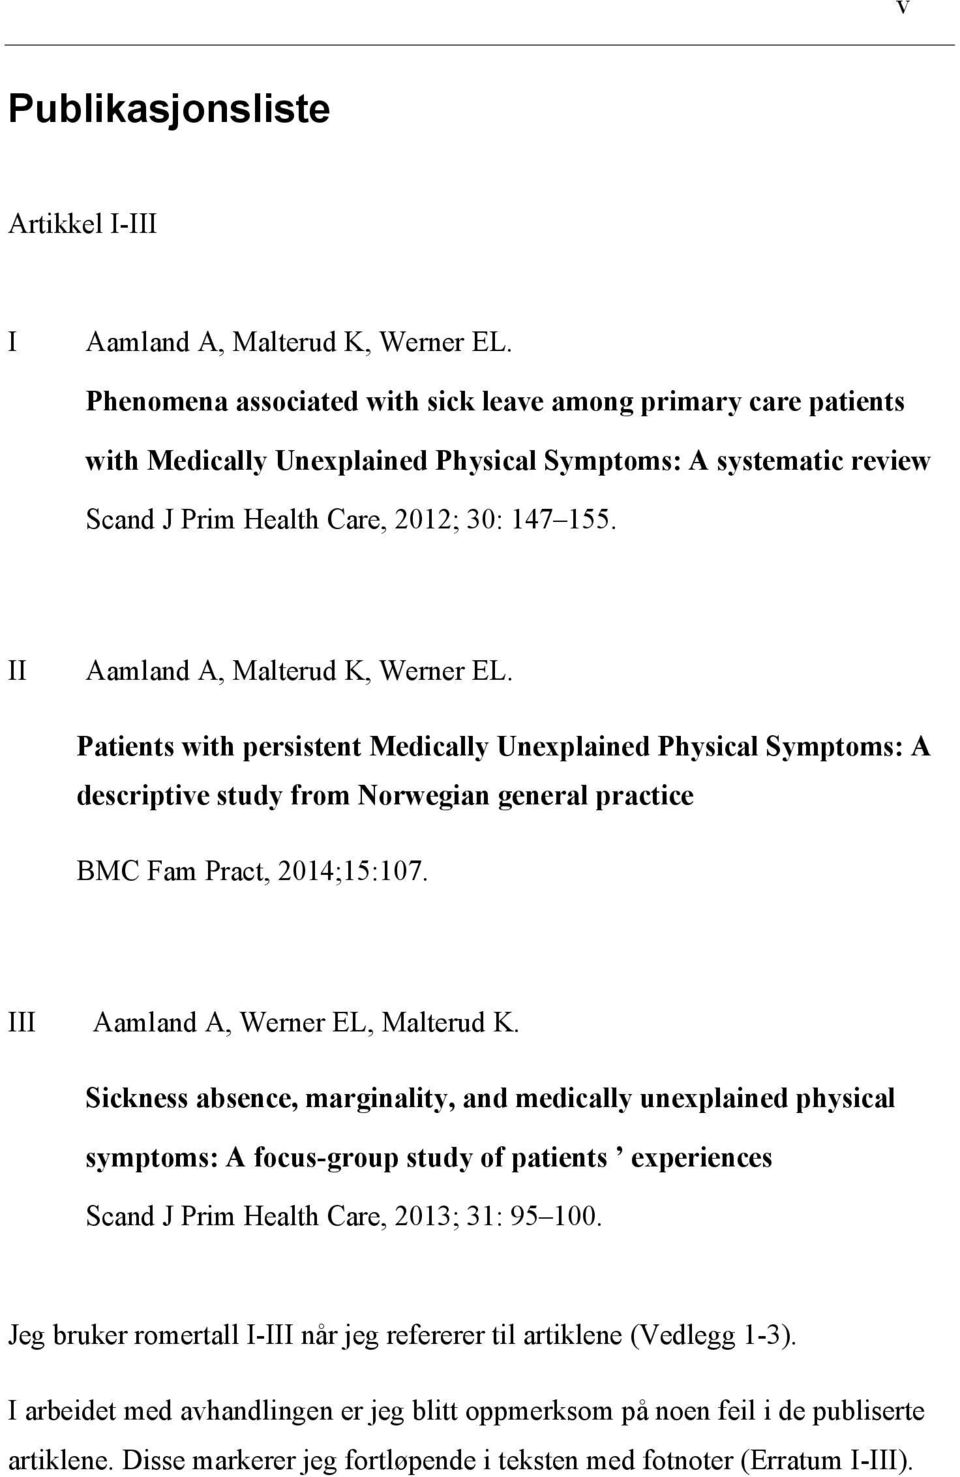 II Aamland A, Malterud K, Werner EL. Patients with persistent Medically Unexplained Physical Symptoms: A descriptive study from Norwegian general practice BMC Fam Pract, 2014;15:107.